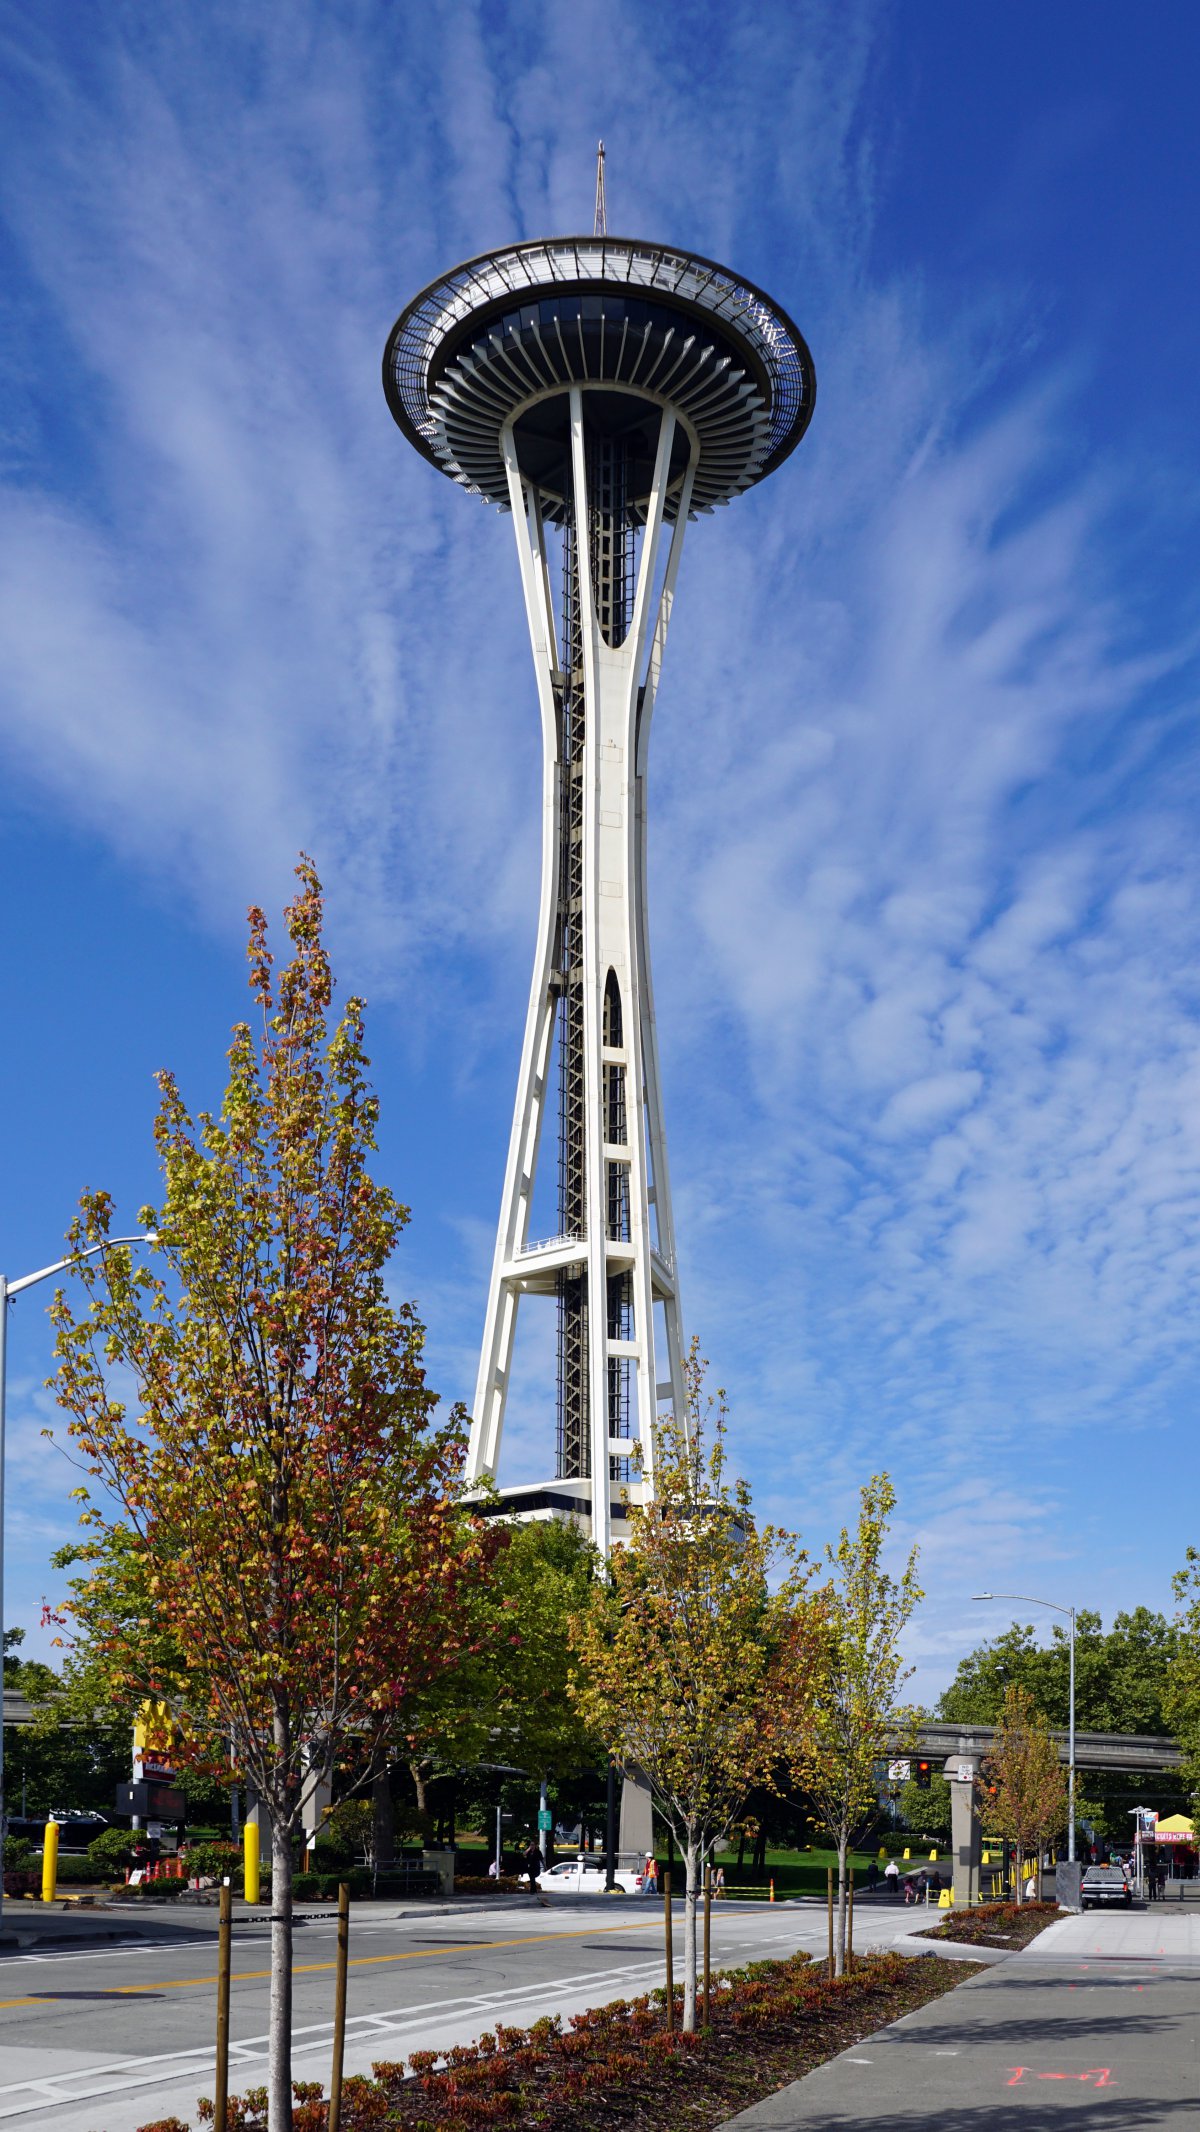 Picture of Space Needle in Seattle, Washington, USA